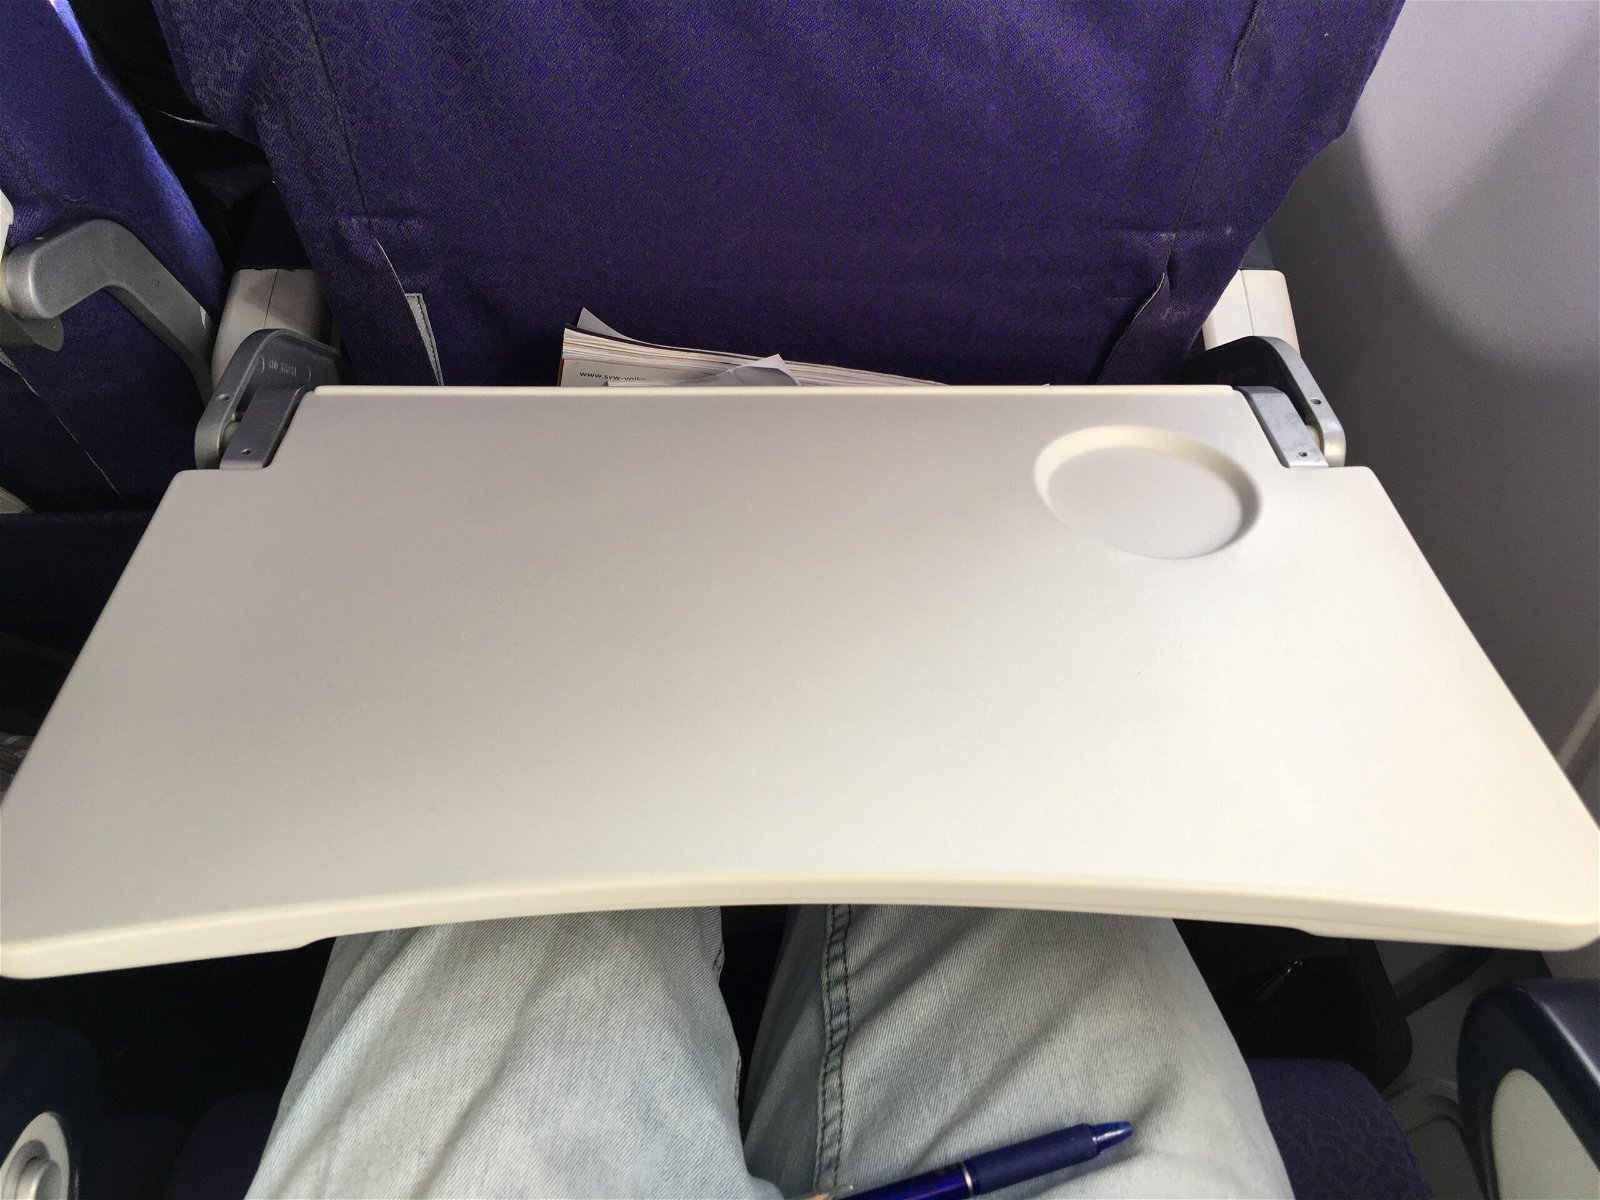 The tray table.